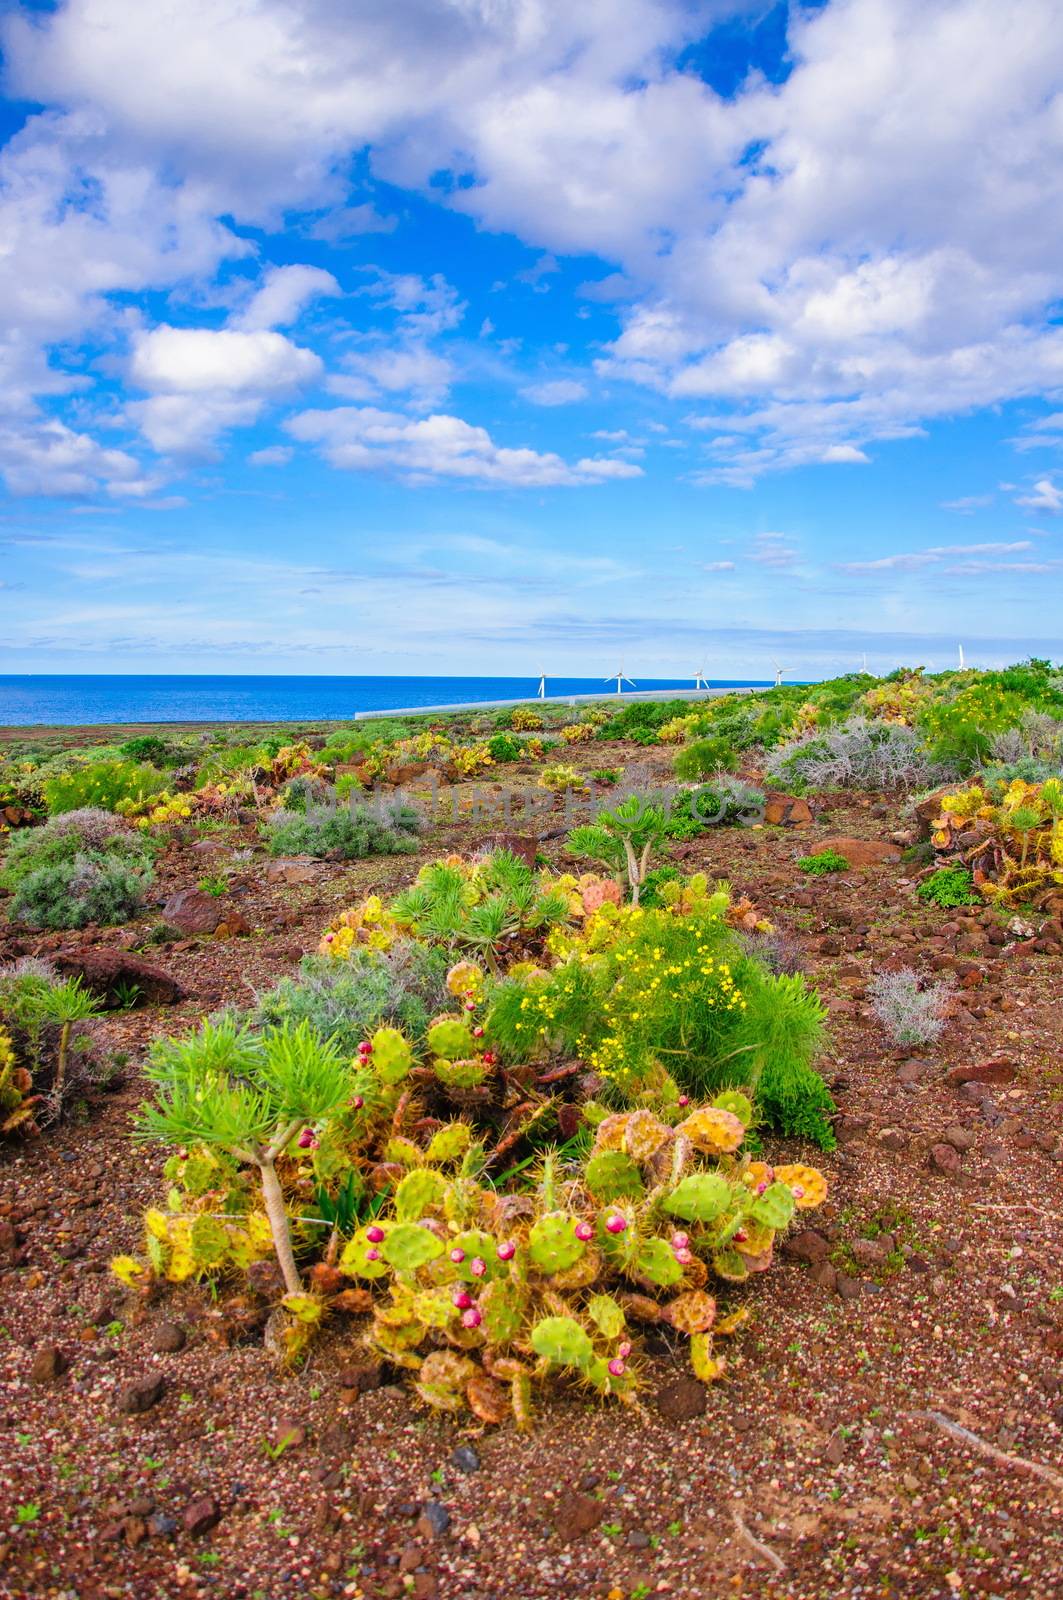 Brightful cactuses in Tenerife, Canary Islands. by Eagle2308